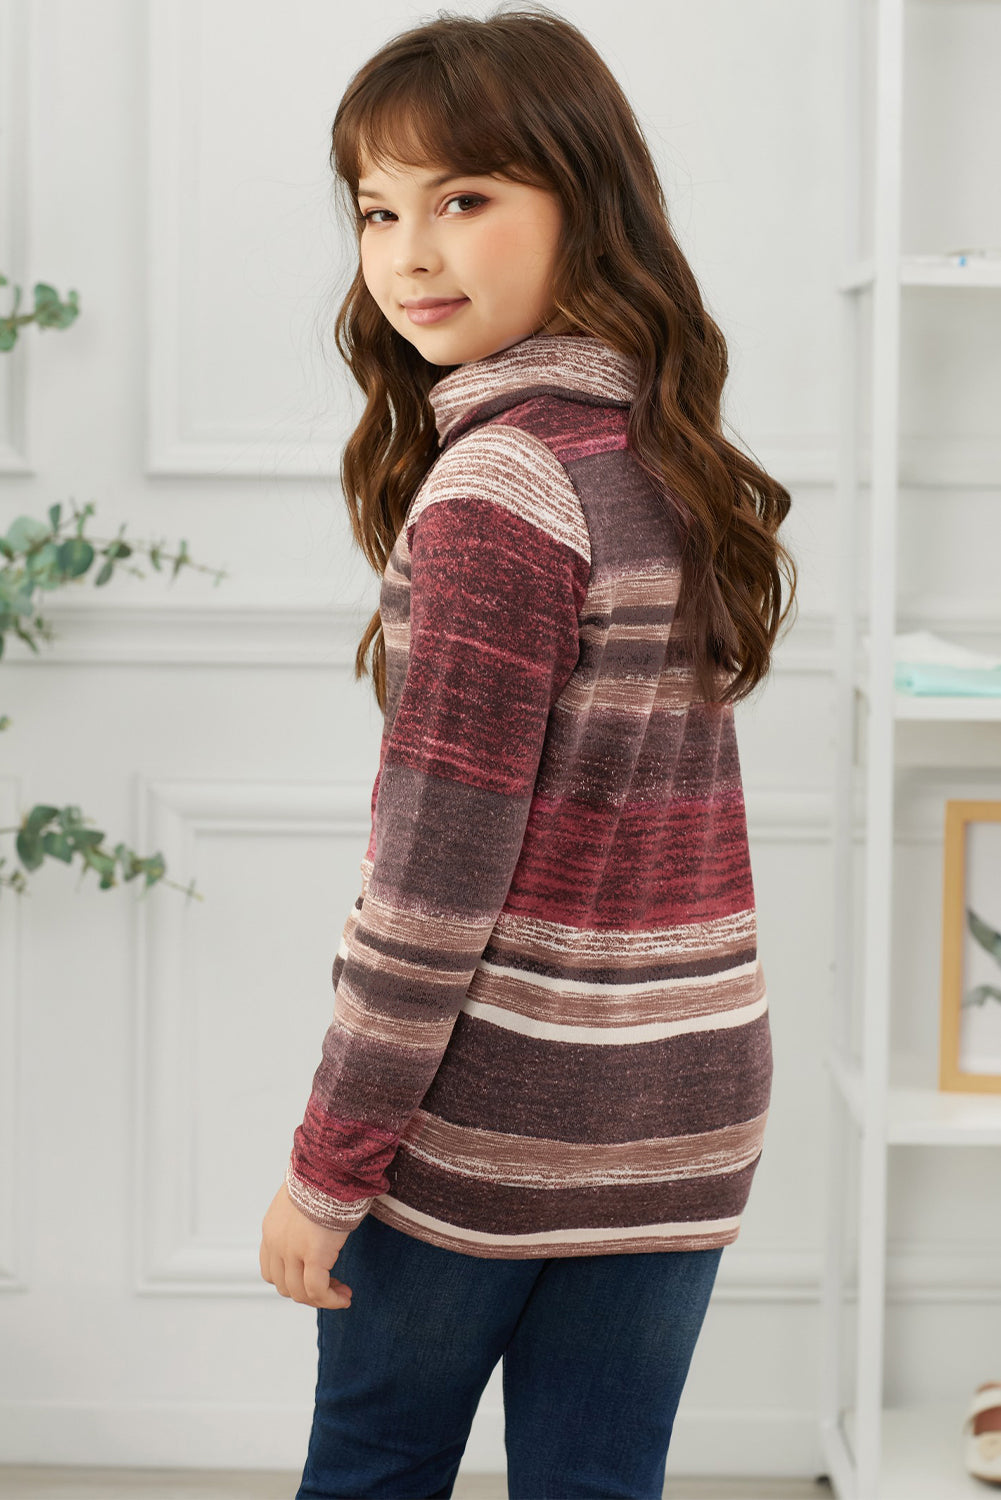 Kids Striped Cowl Neck Top with Pockets